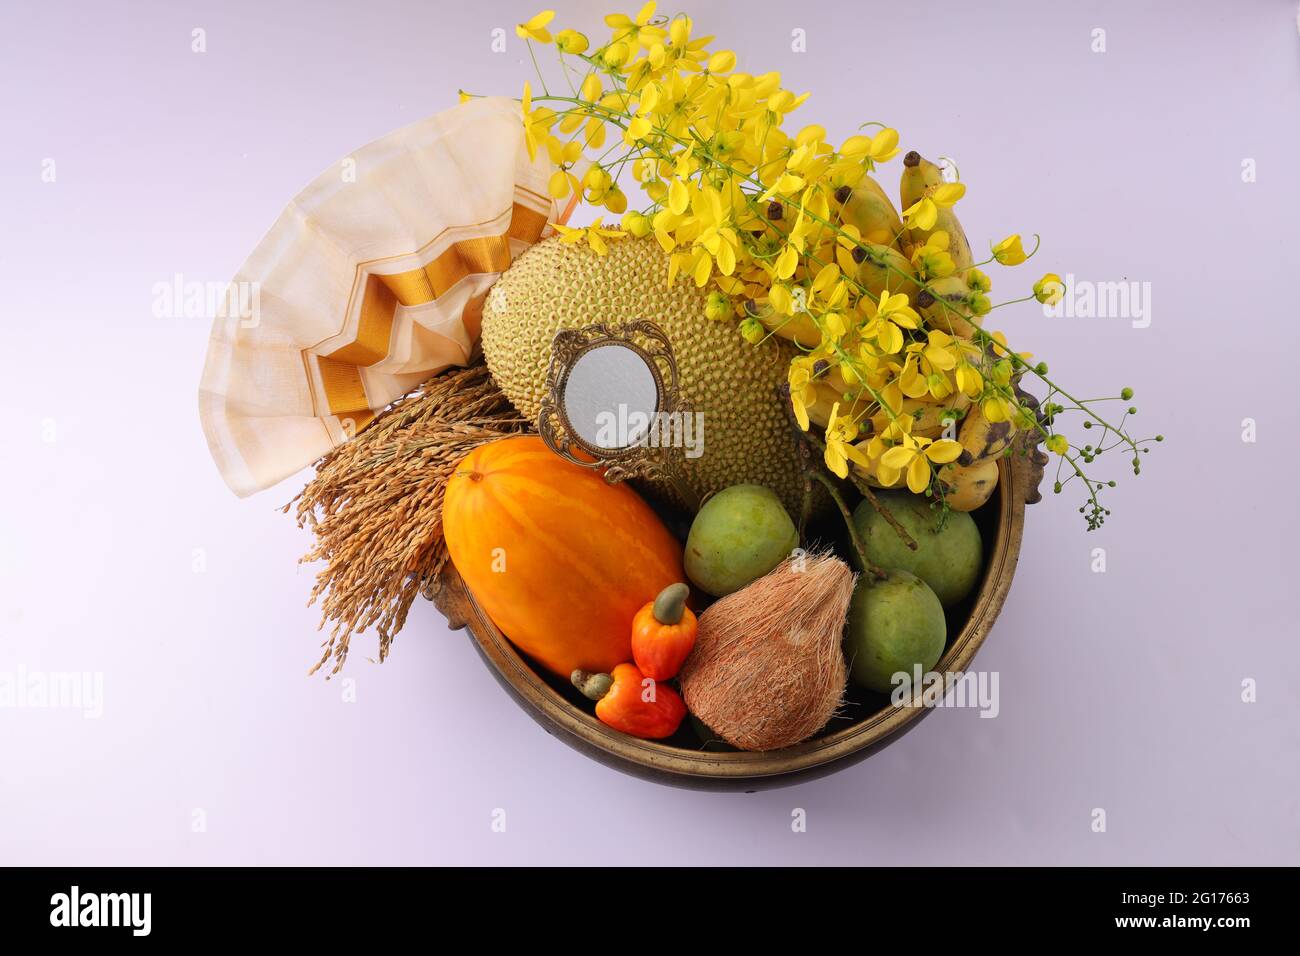 Kerala festival,rituals of Vishu festival -Vishukkani or Vishu sight, a brass vessel  or Urule filled with fruits and vegetables mostly  available in Stock Photo